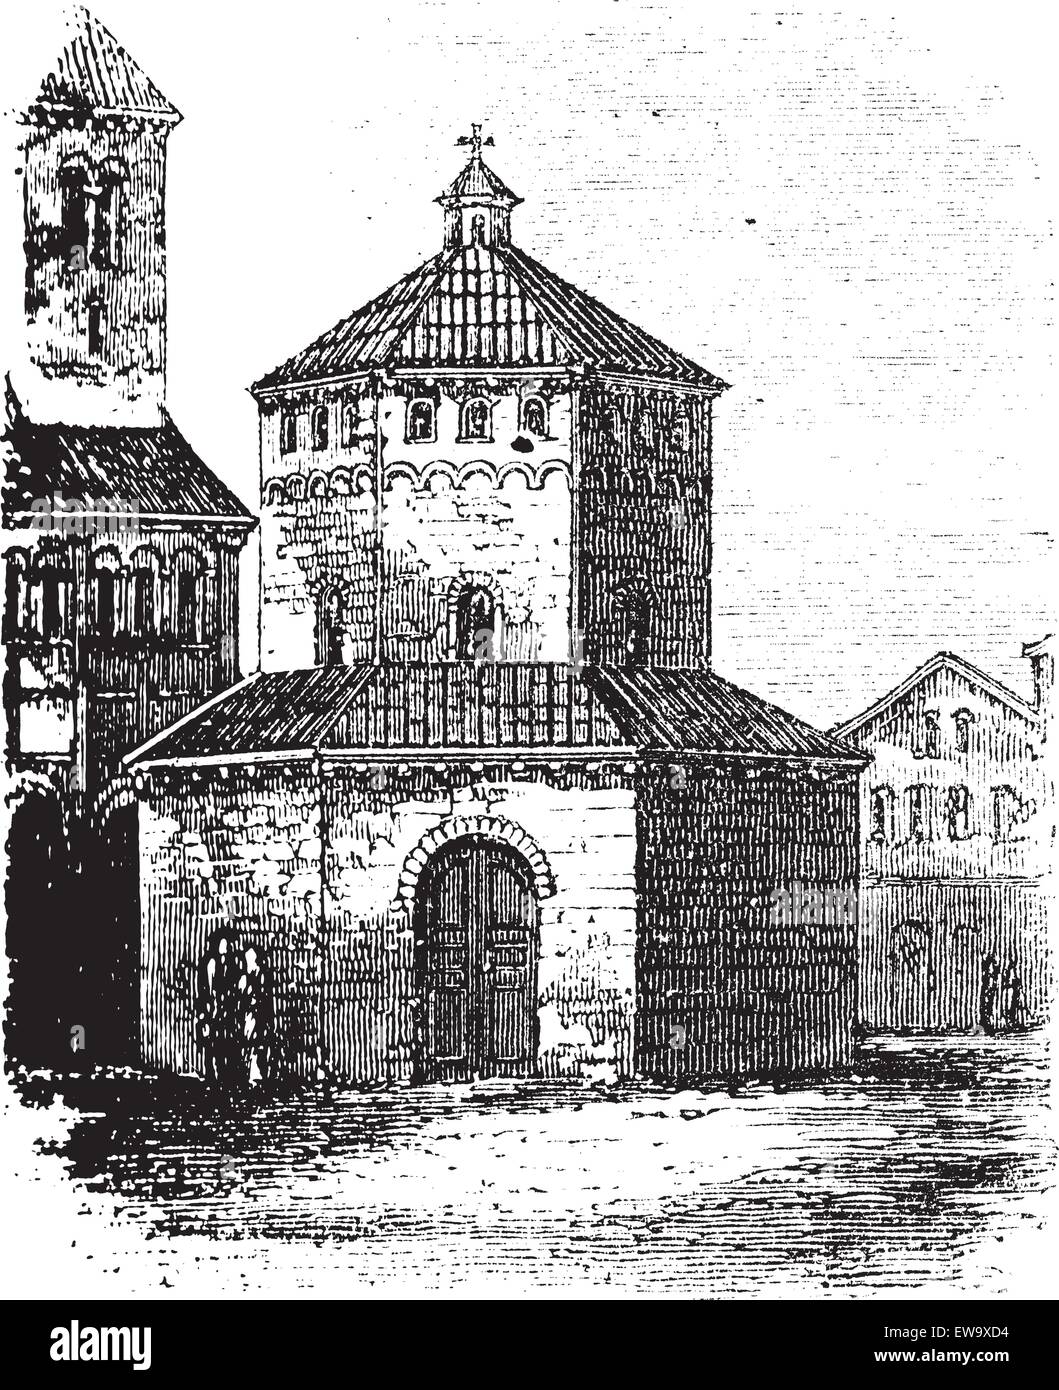 Baptistry of Novara, in Piedmont, Italy, during the 1890s, vintage engraving. Old engraved illustration of the Baptistry of Novara. Stock Vector